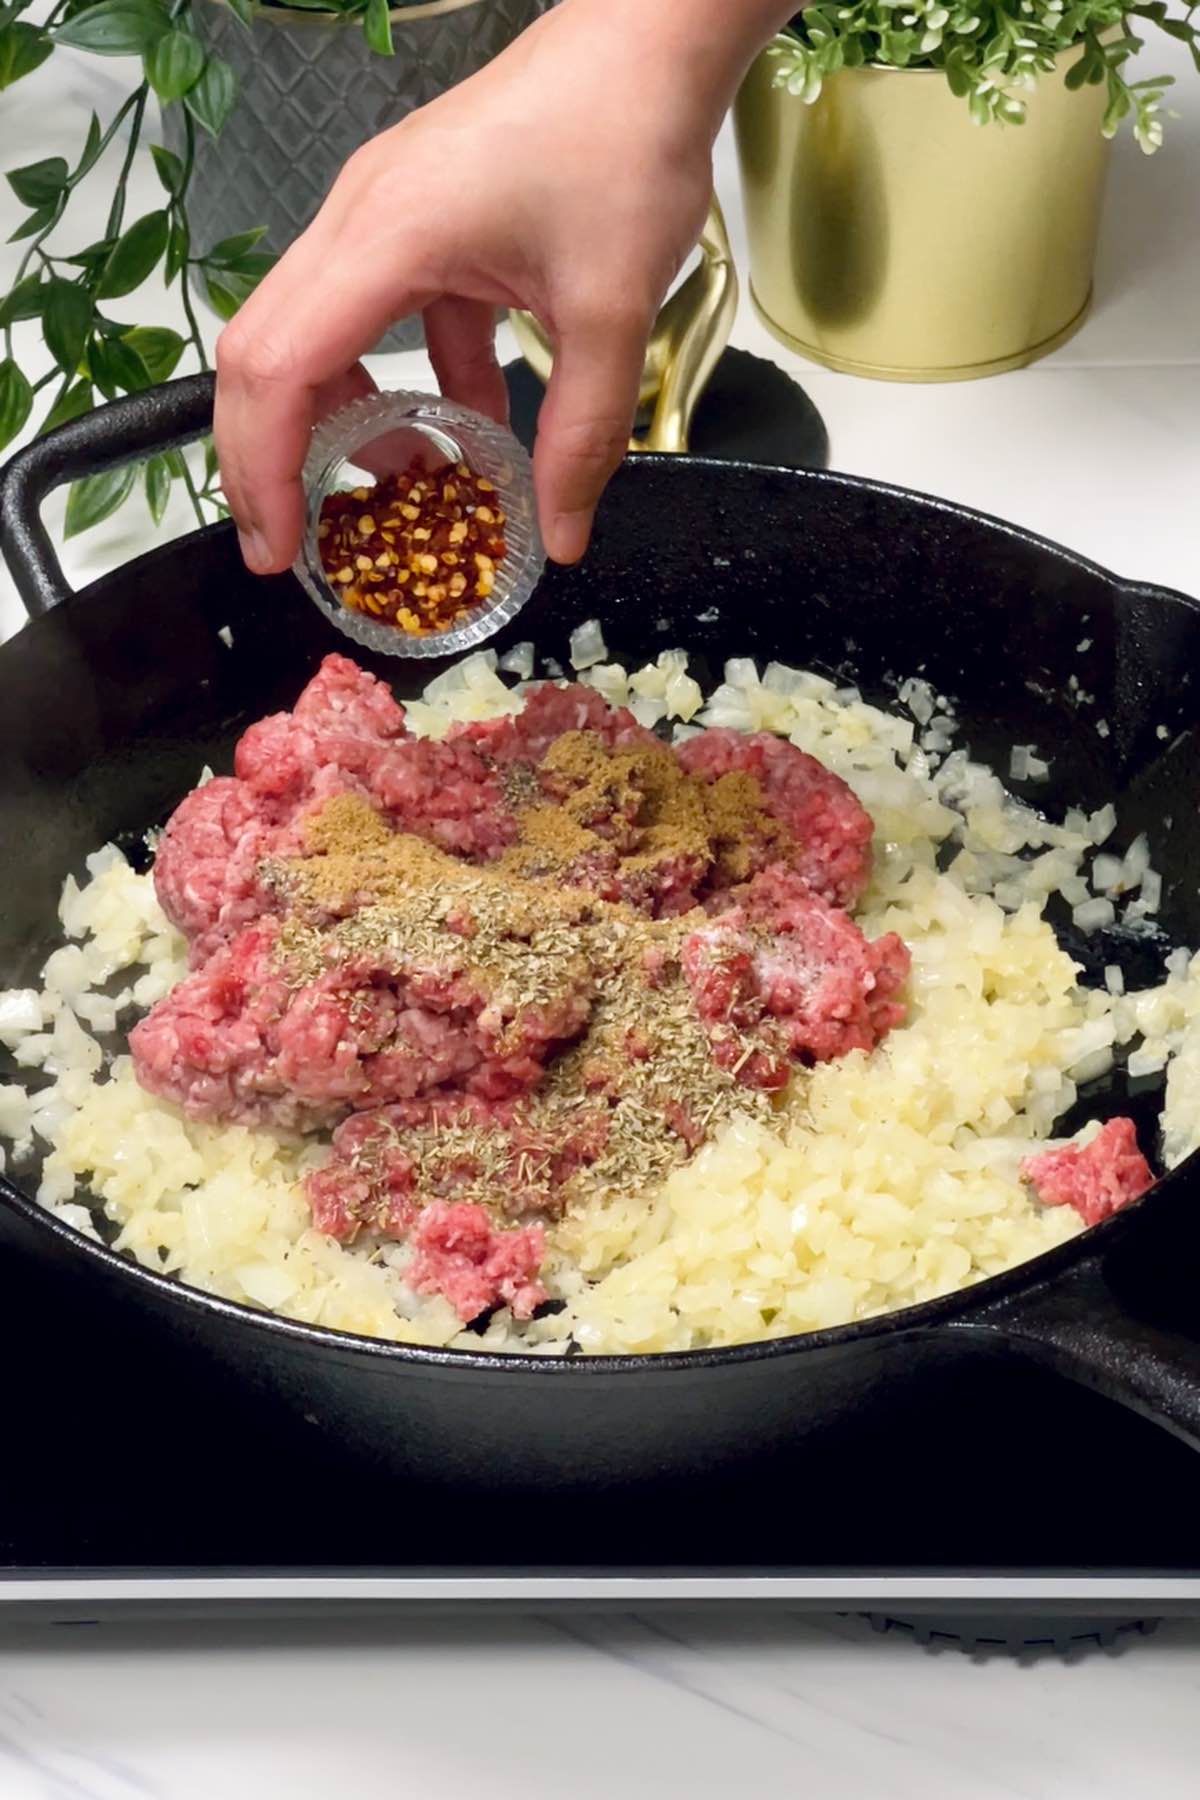 adding ground beef and seasonings to the skillet